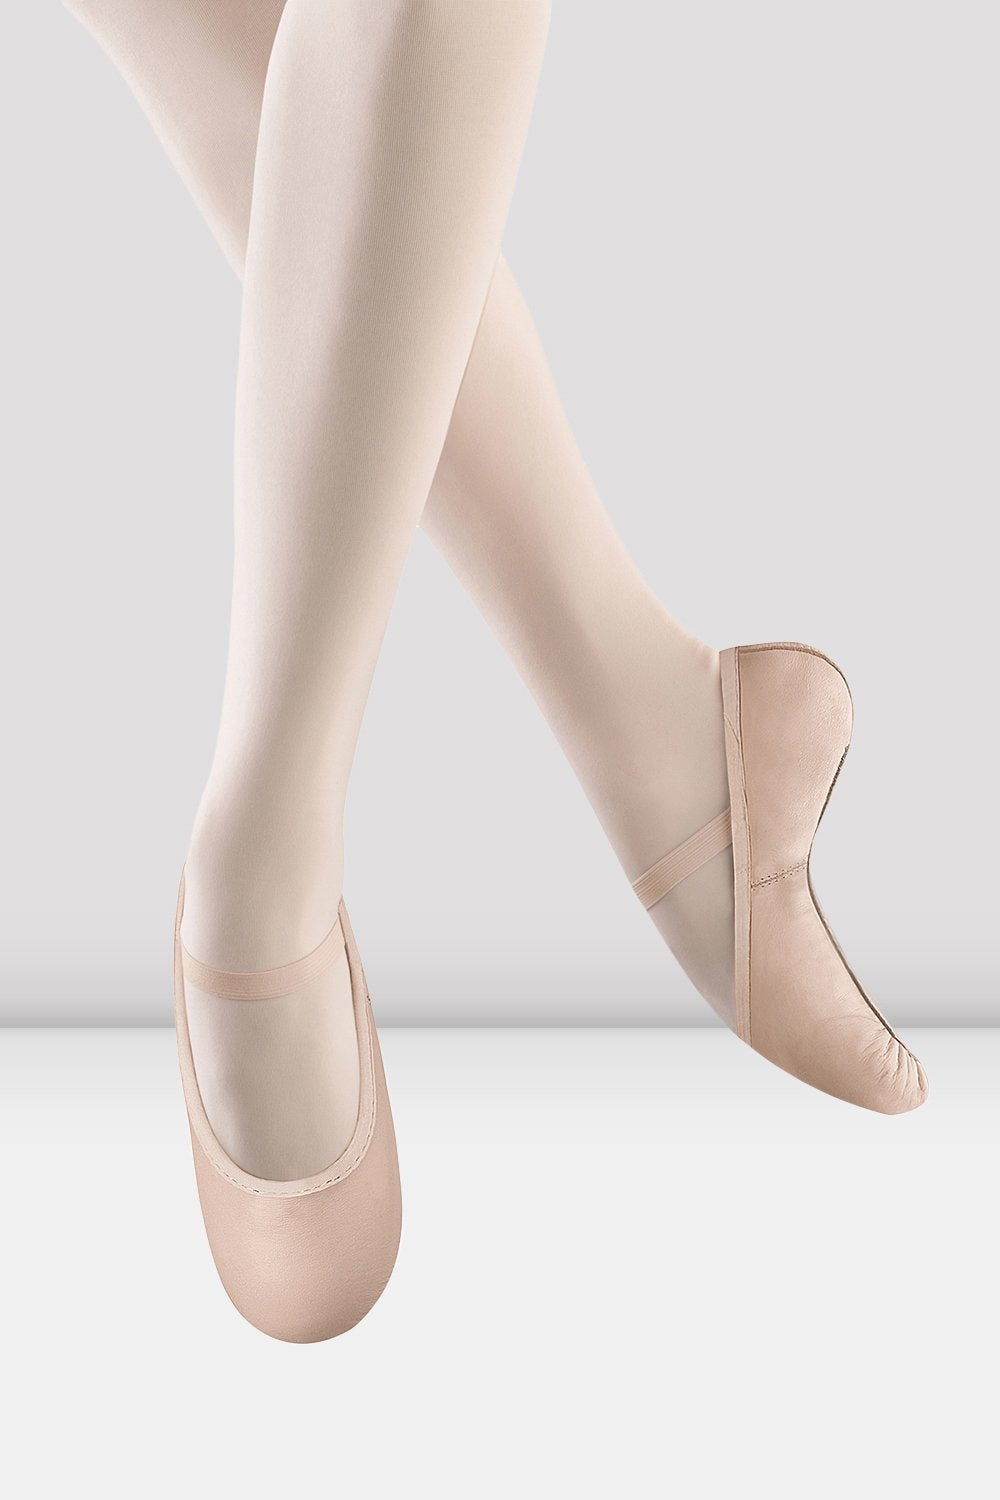 Bloch Contoursoft Footless Tights